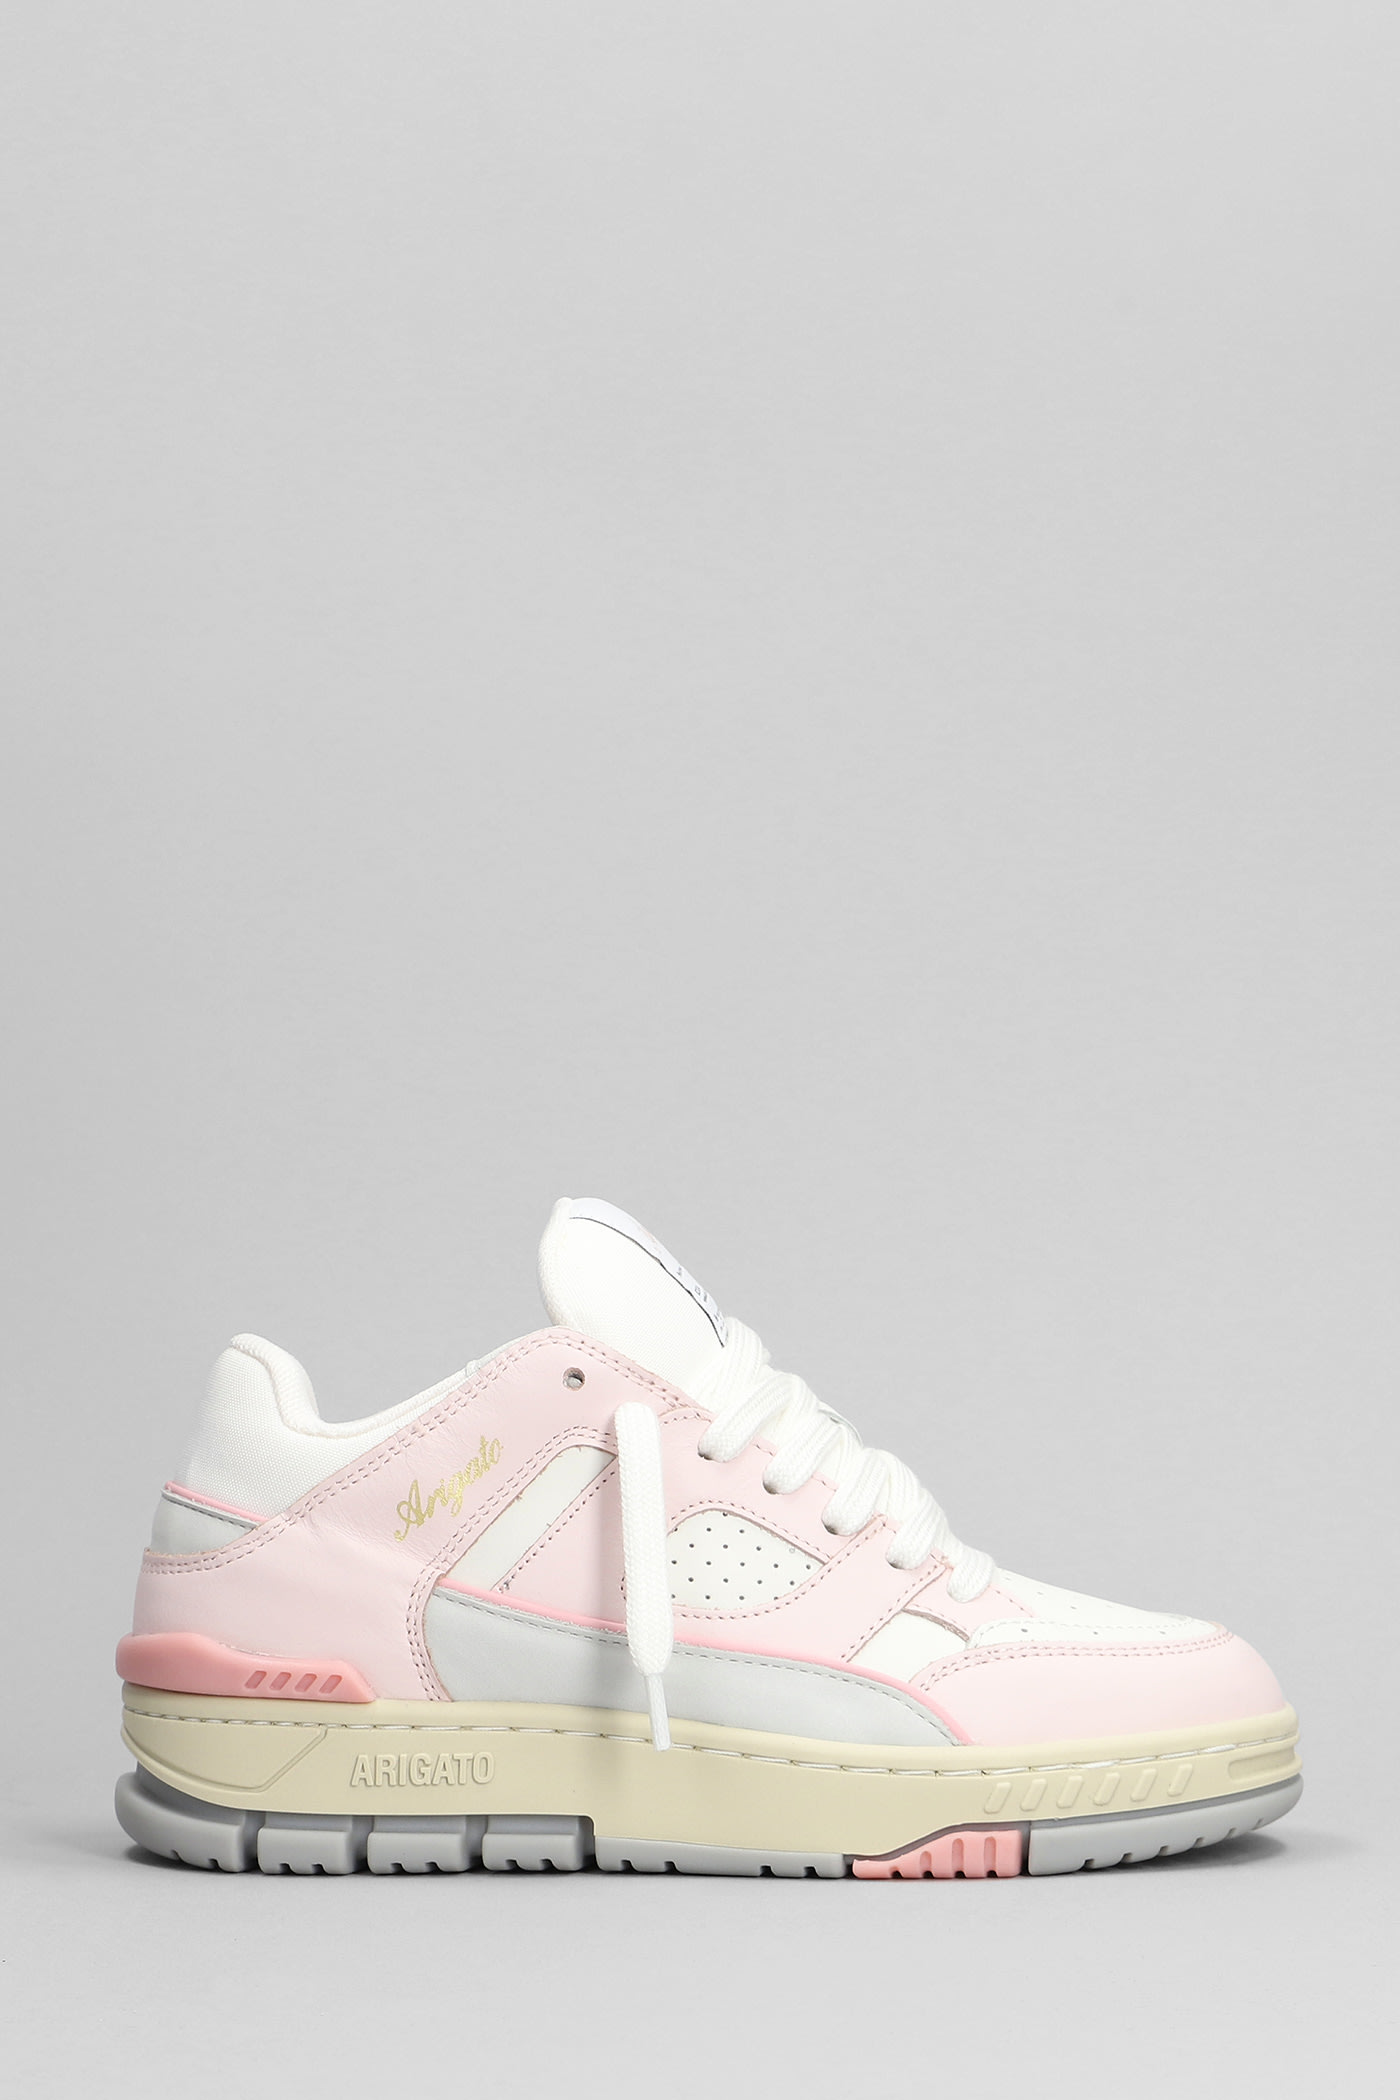 Axel Arigato Area Lo Sneaker Sneakers In Rose-pink Leather